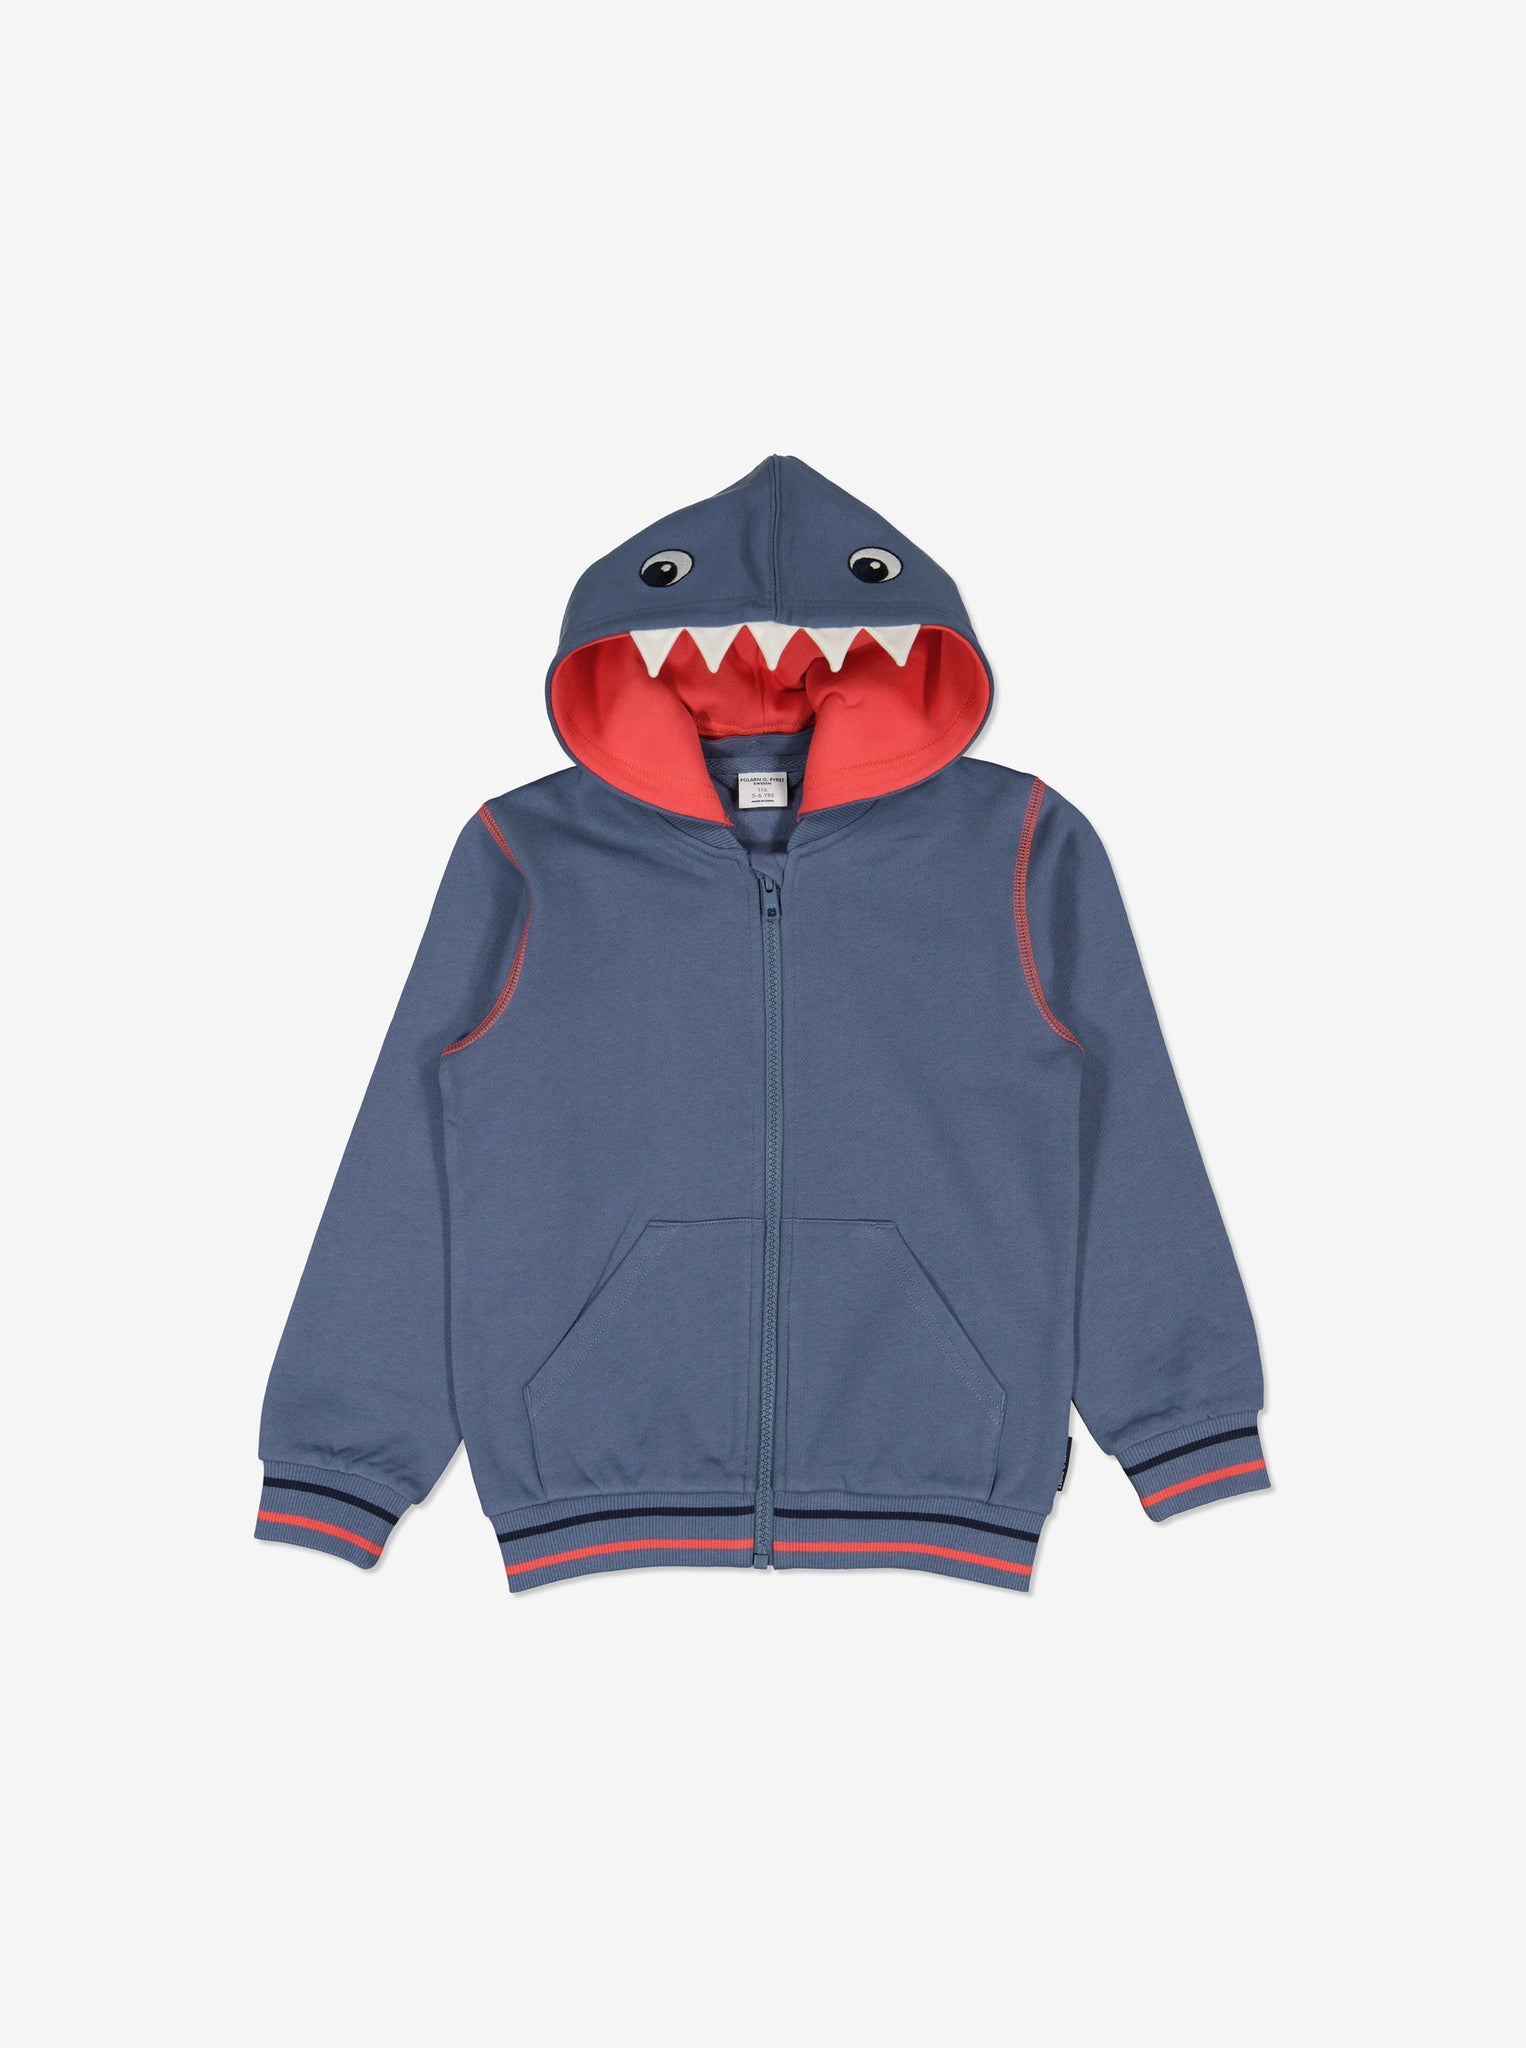 Shark Applique Kids Hoodie from Polarn O. Pyret Kidswear. Made from 100% GOTS Organic Cotton.